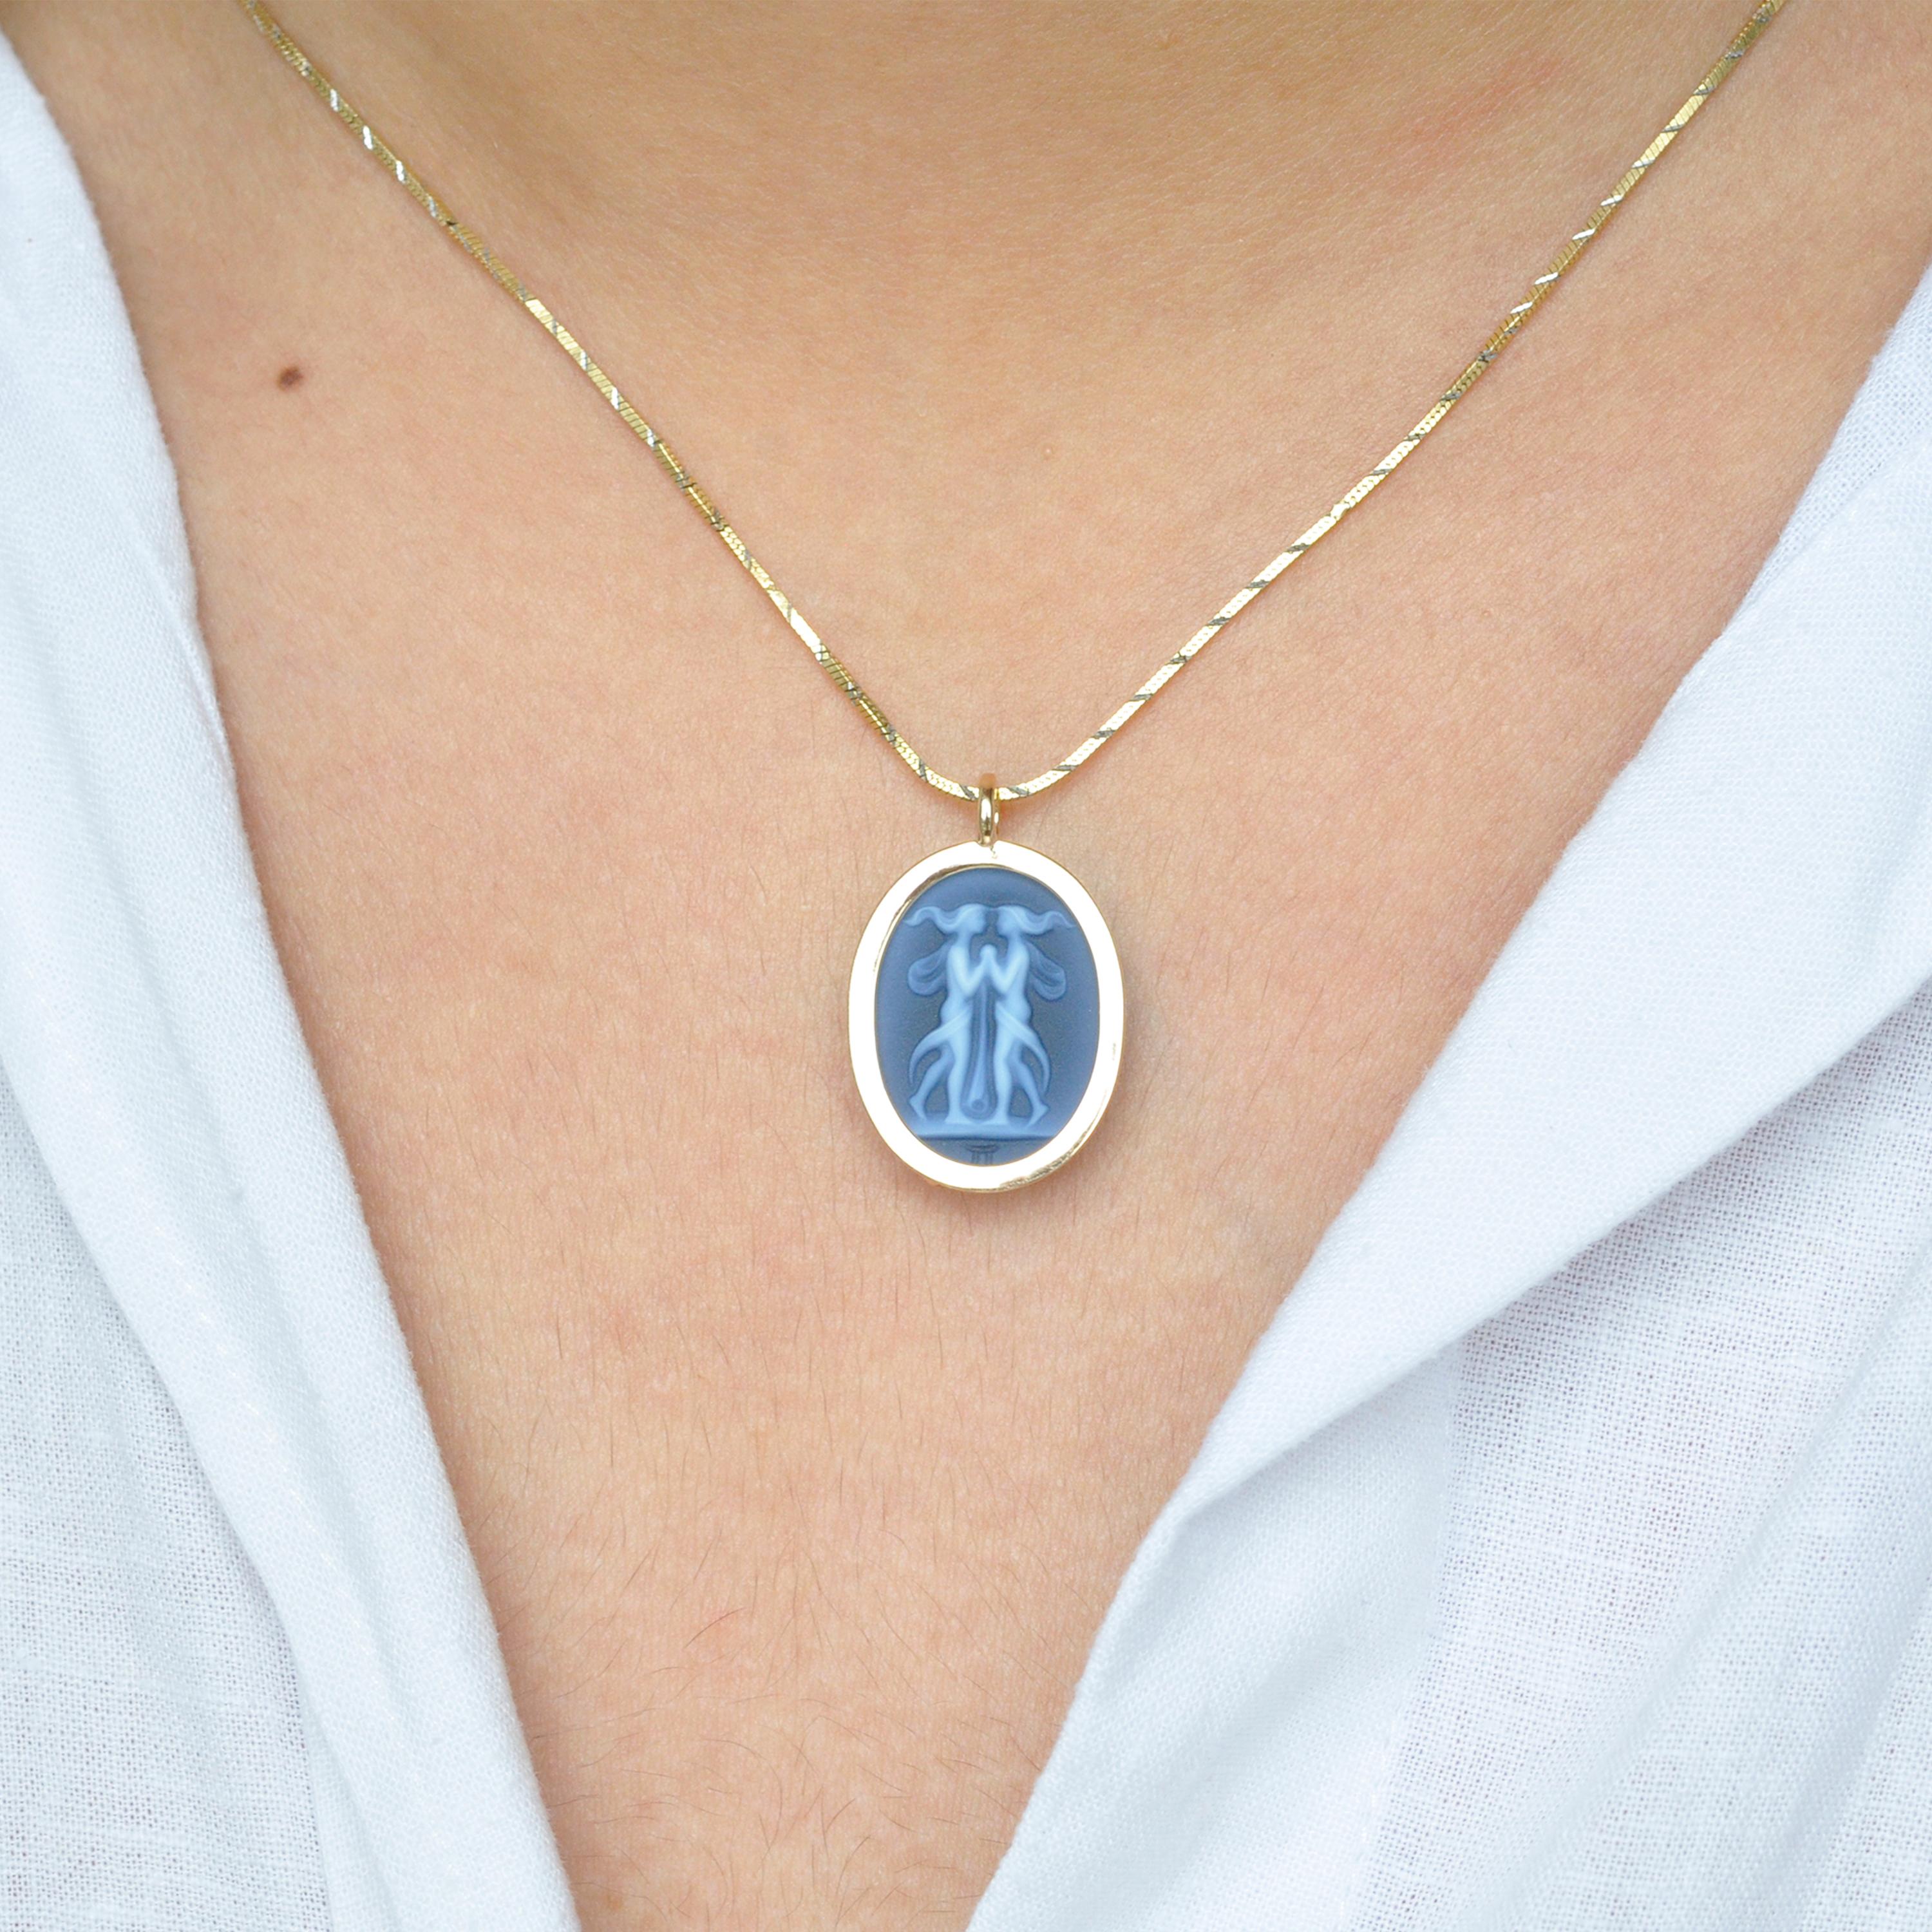 The reversible pendant necklace featuring a Gemini sun sign carving cameo zodiac diamond in 14 karat gold is a stunning piece of jewelry that combines exceptional craftsmanship, elegance, and personalization. With its reversible design, it offers